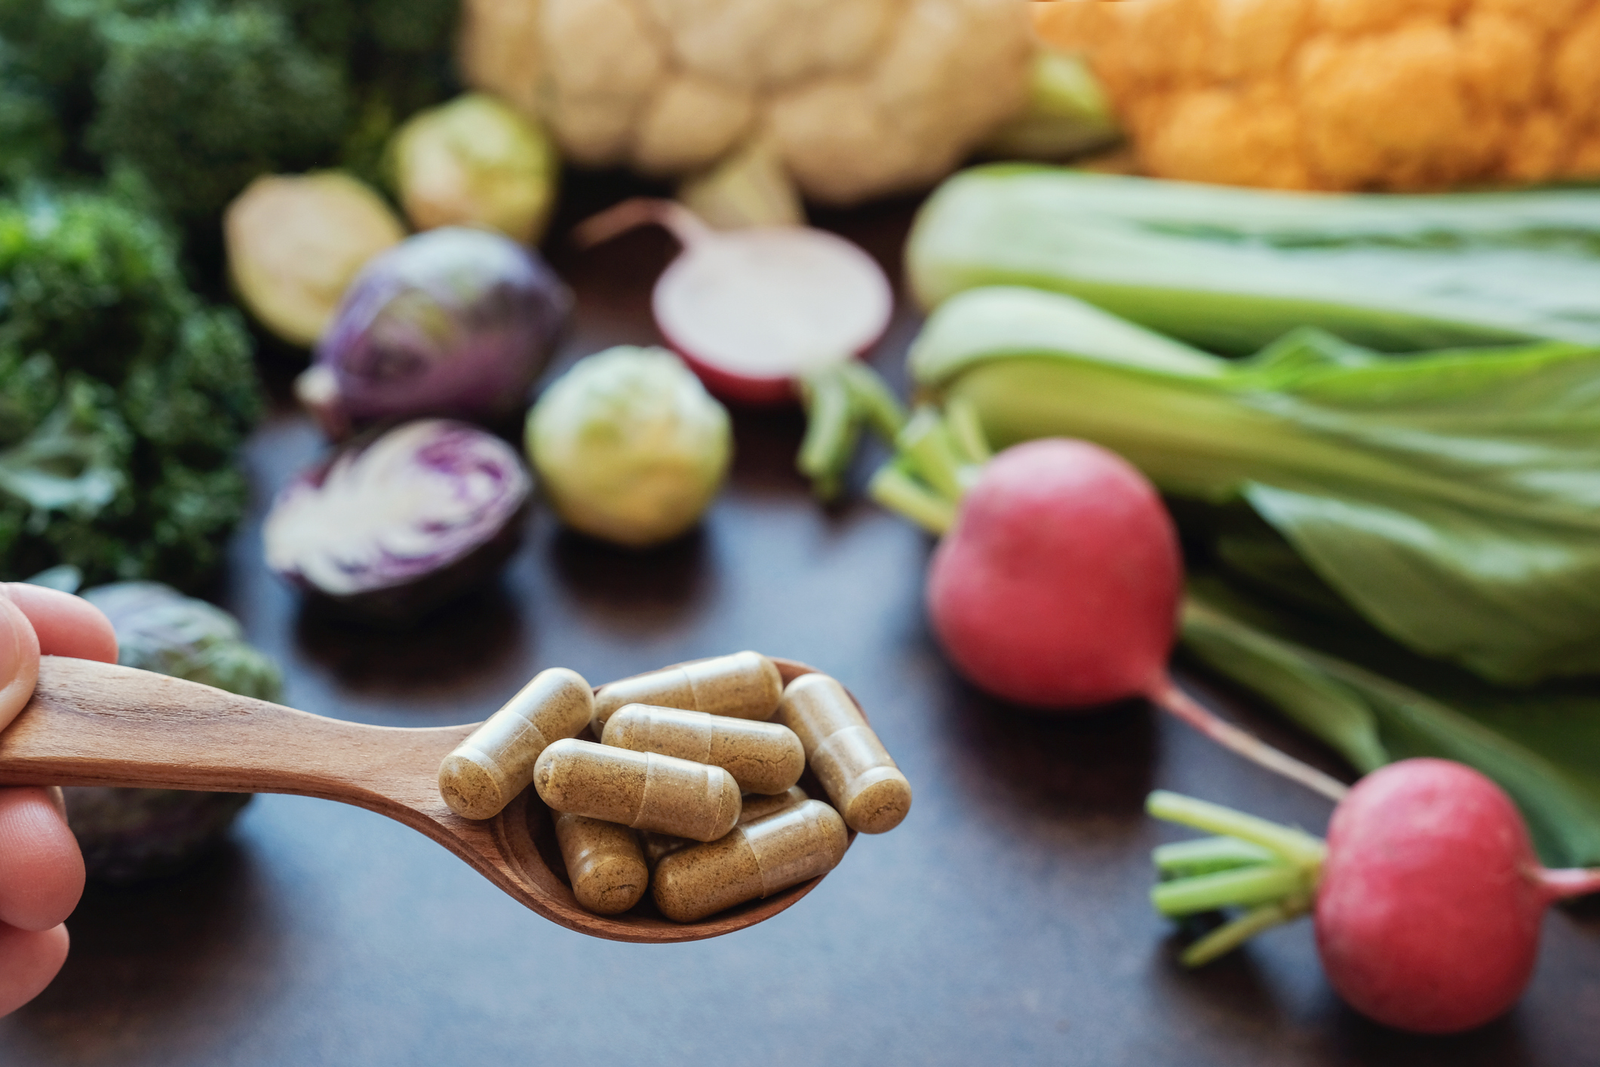 Importance of Nutritional supplements for better fitness